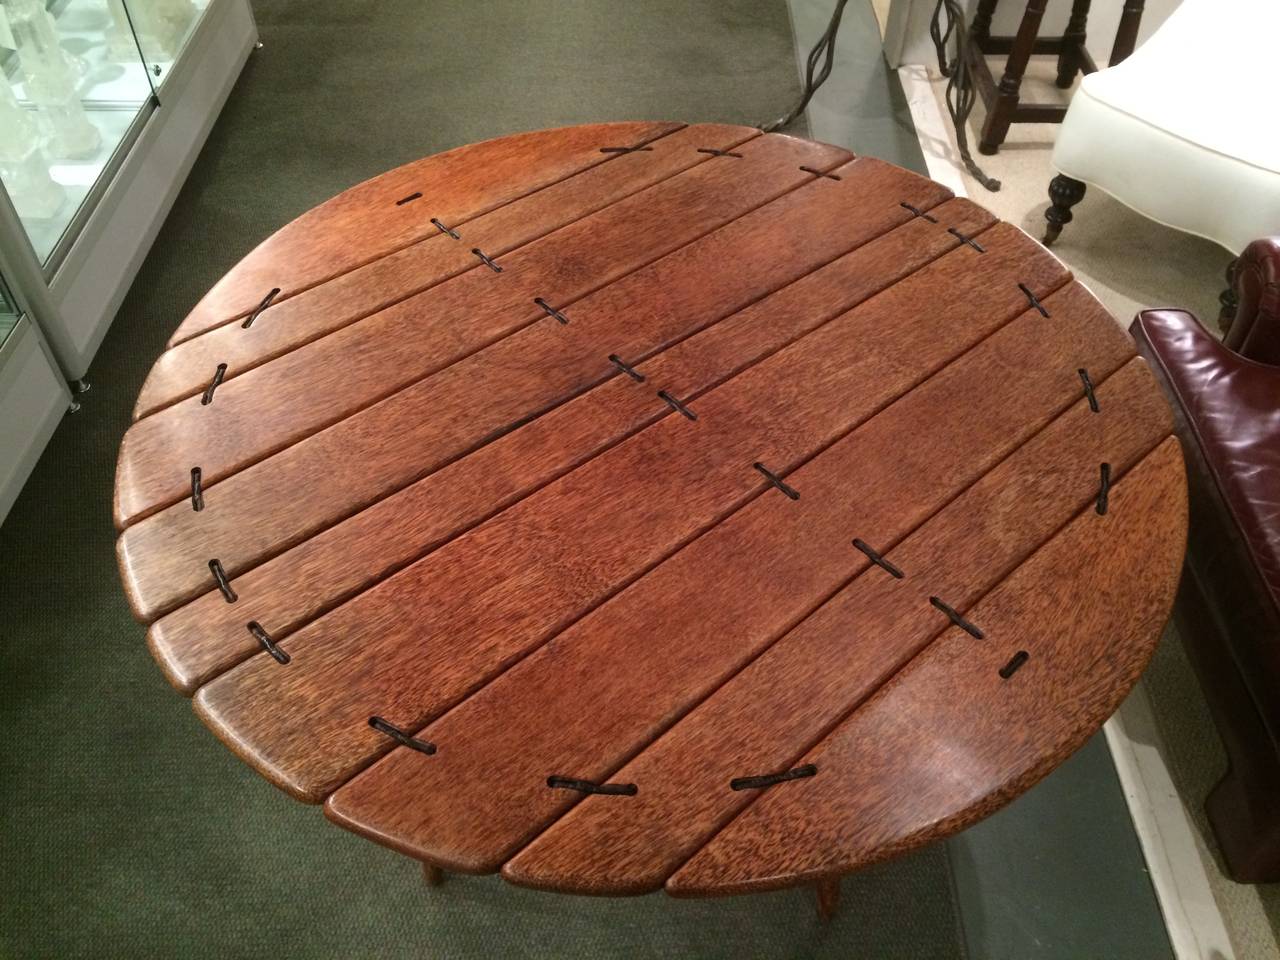 Palm wood dining or breakfast table. This handsome table is constructed of palm wood held together with leather wrapped steel.